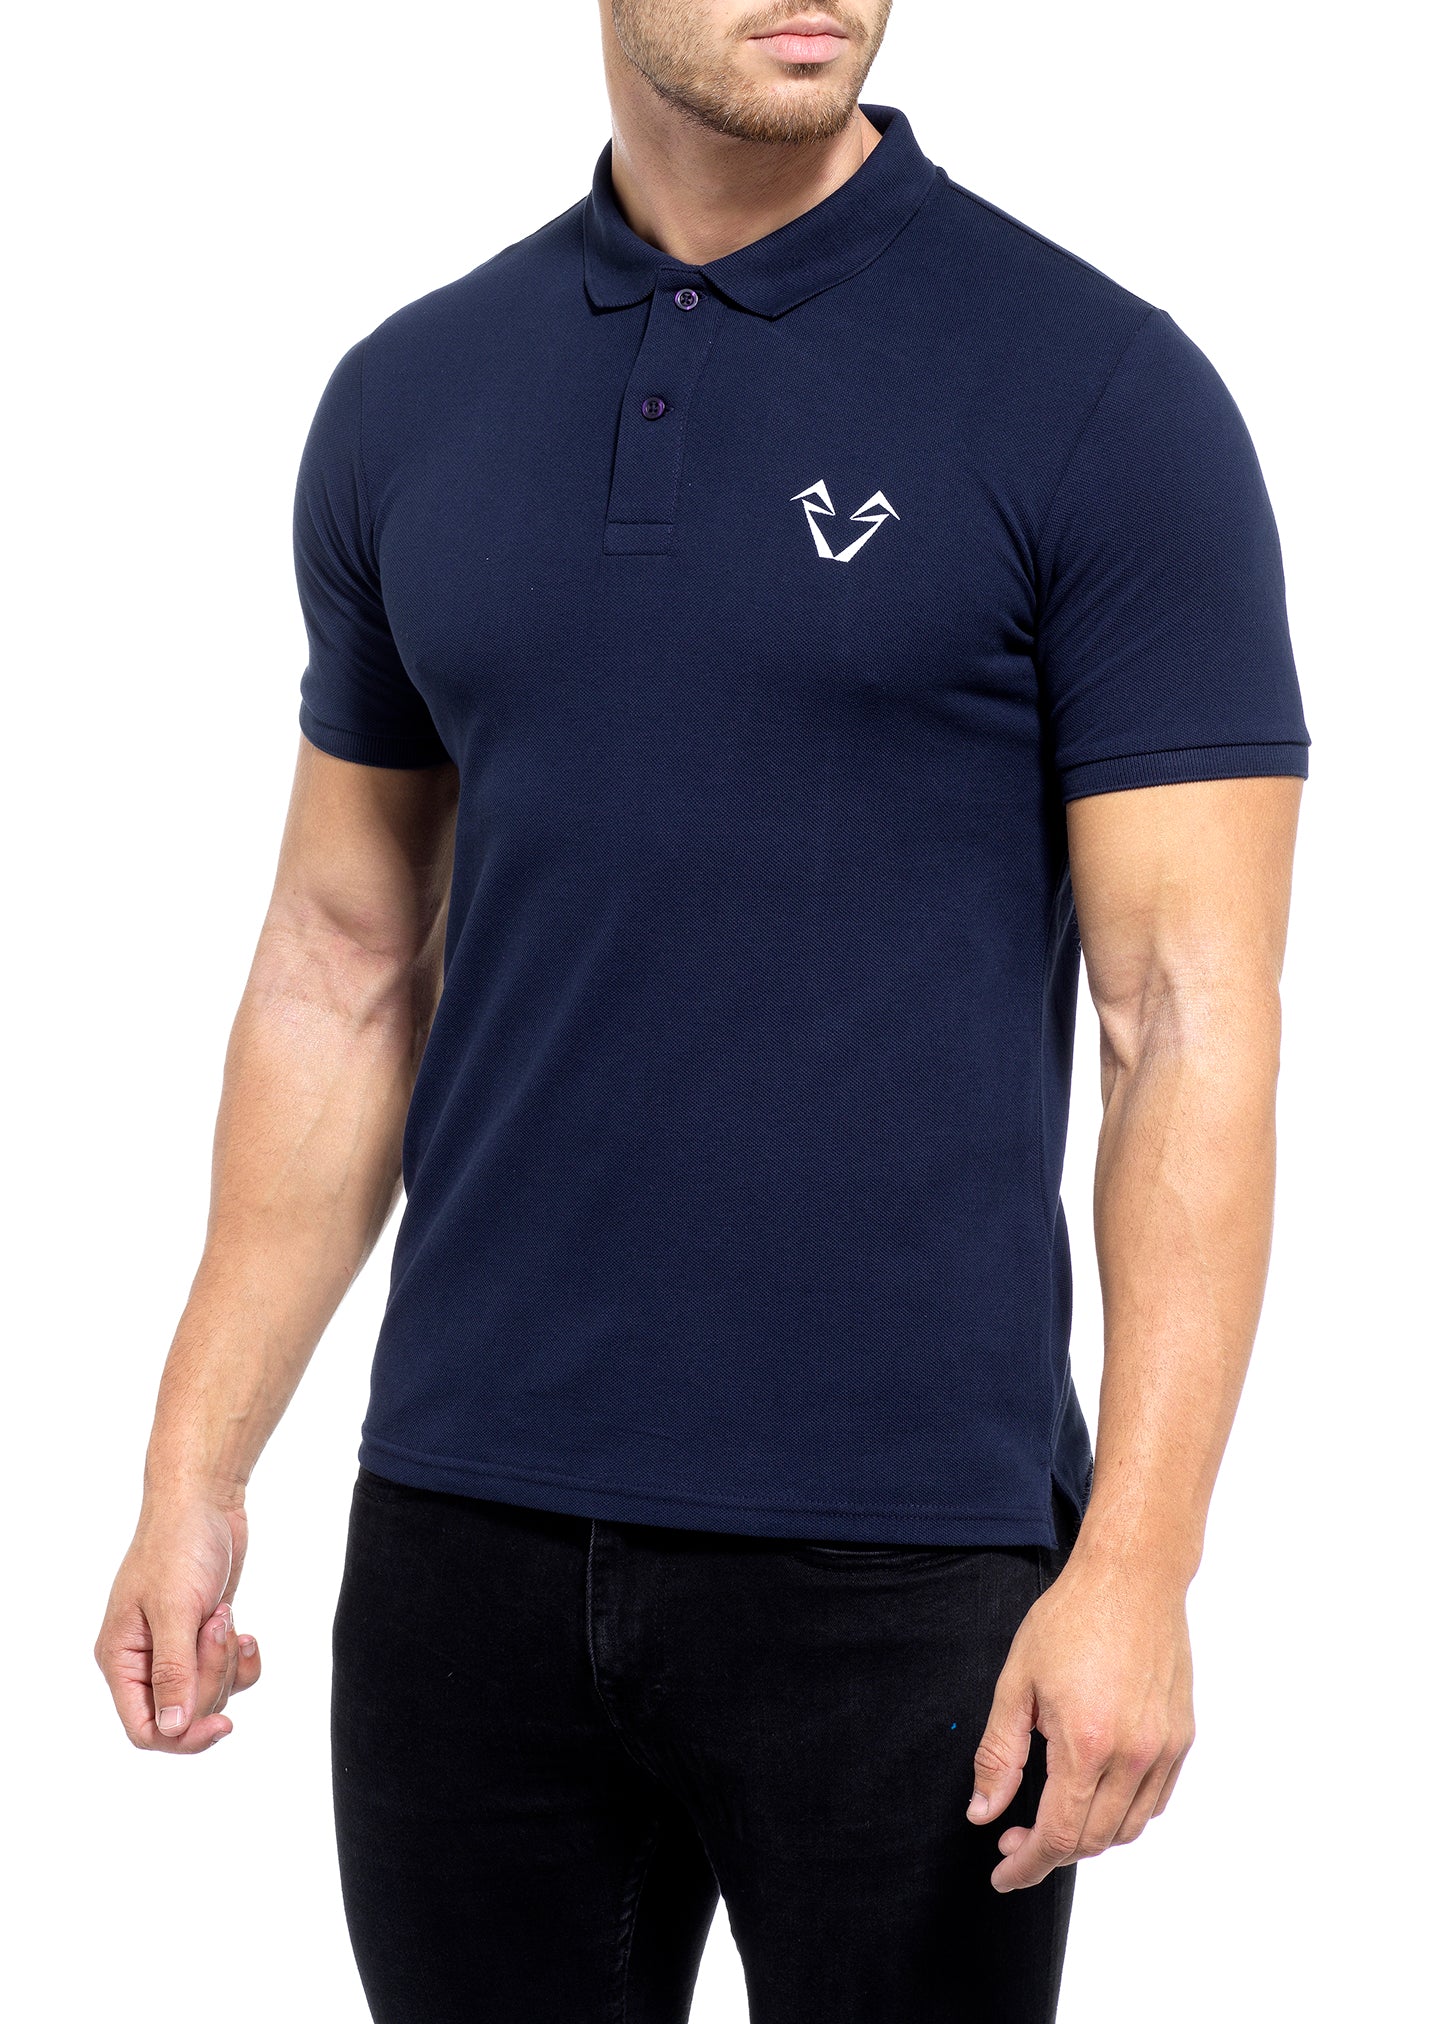  Navy Muscle Fit Polos